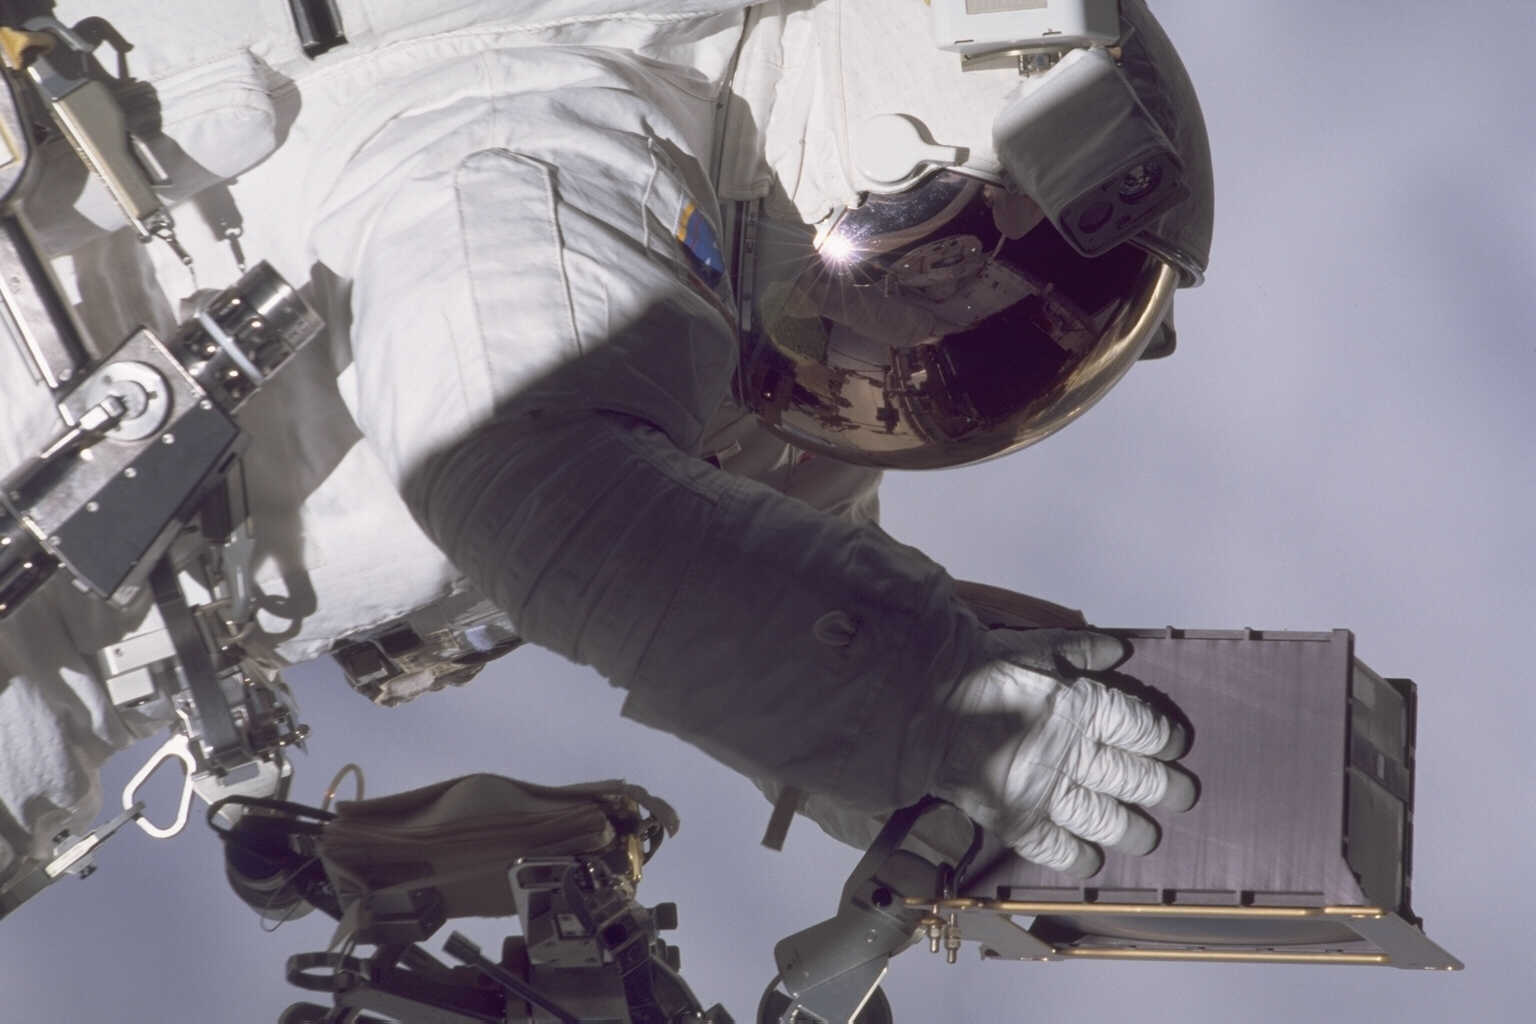 Astronaut John Grunsfeld is maneuvering over to the Hubble spacecraft with a box to install